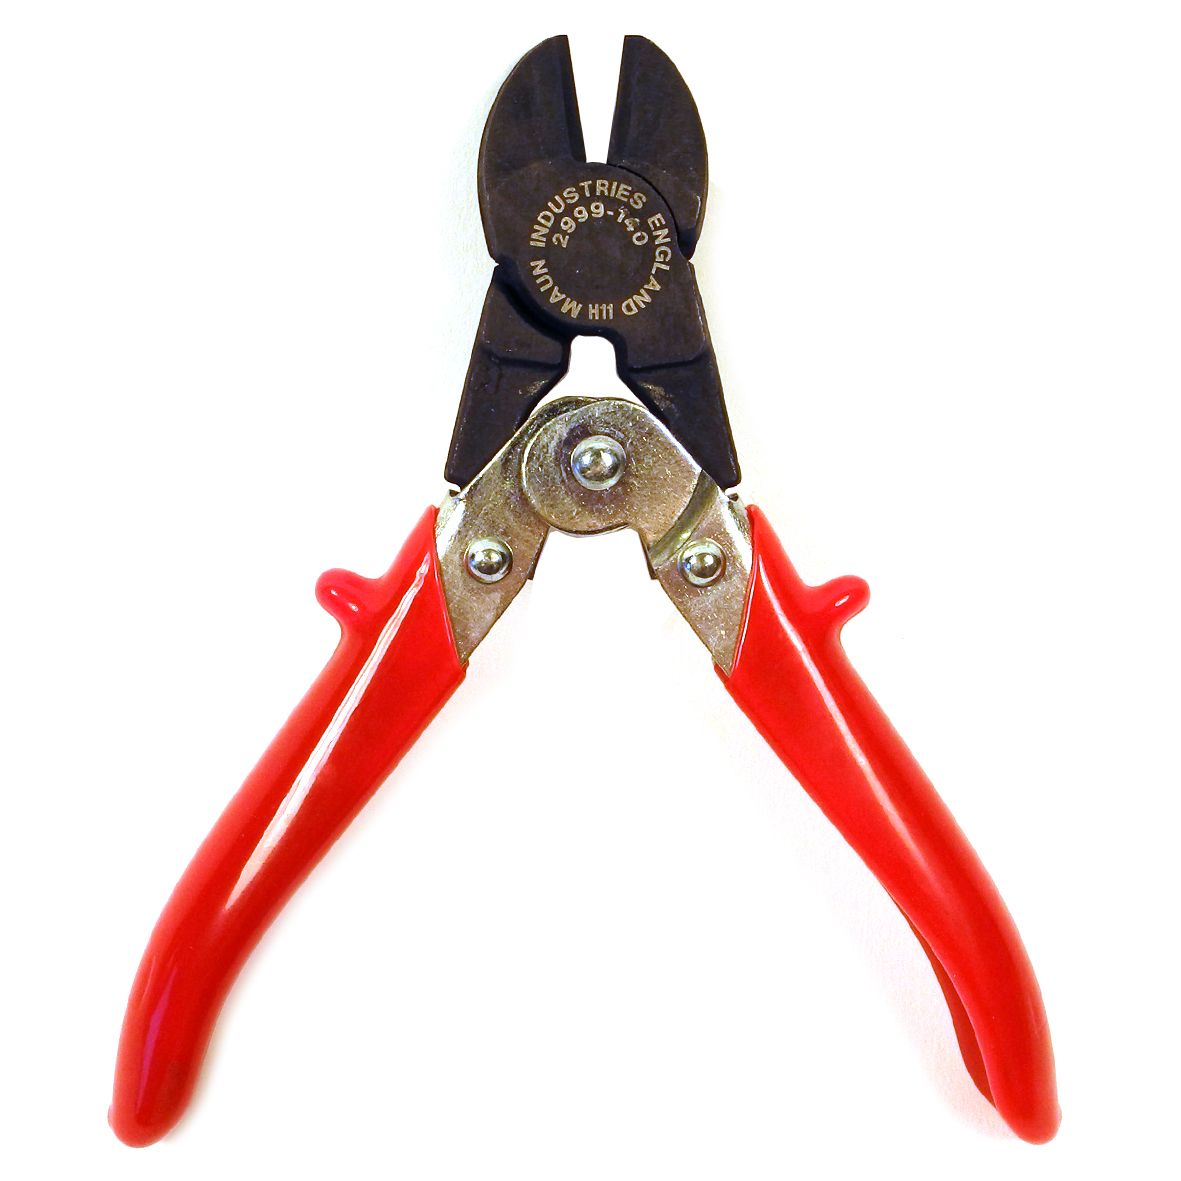 How to use pliers - Maun Industries Limited